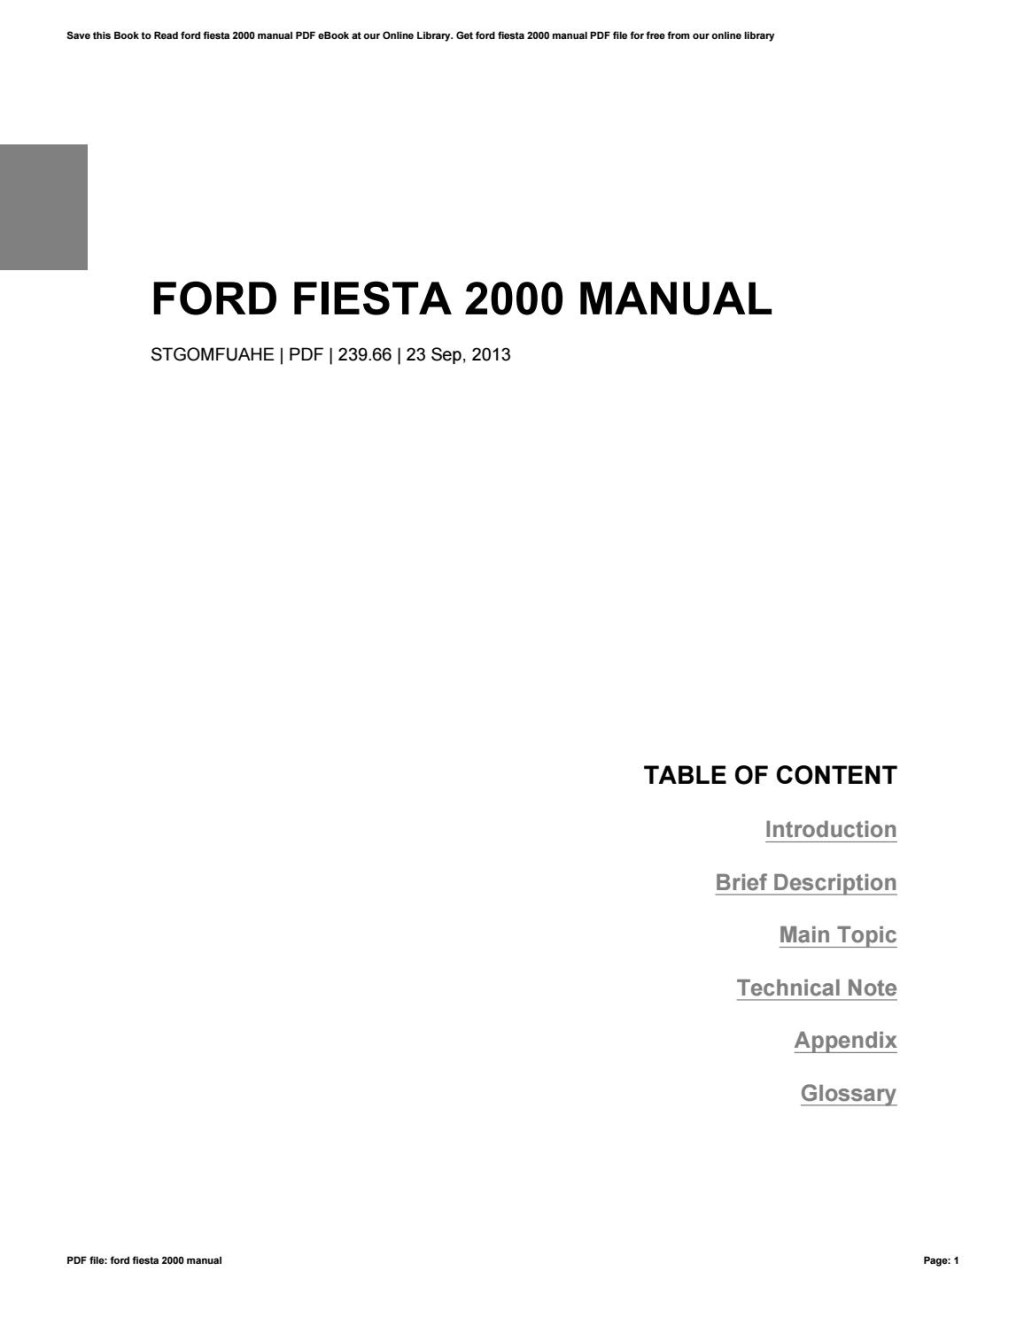 Picture of: Ford fiesta  manual by u – Issuu